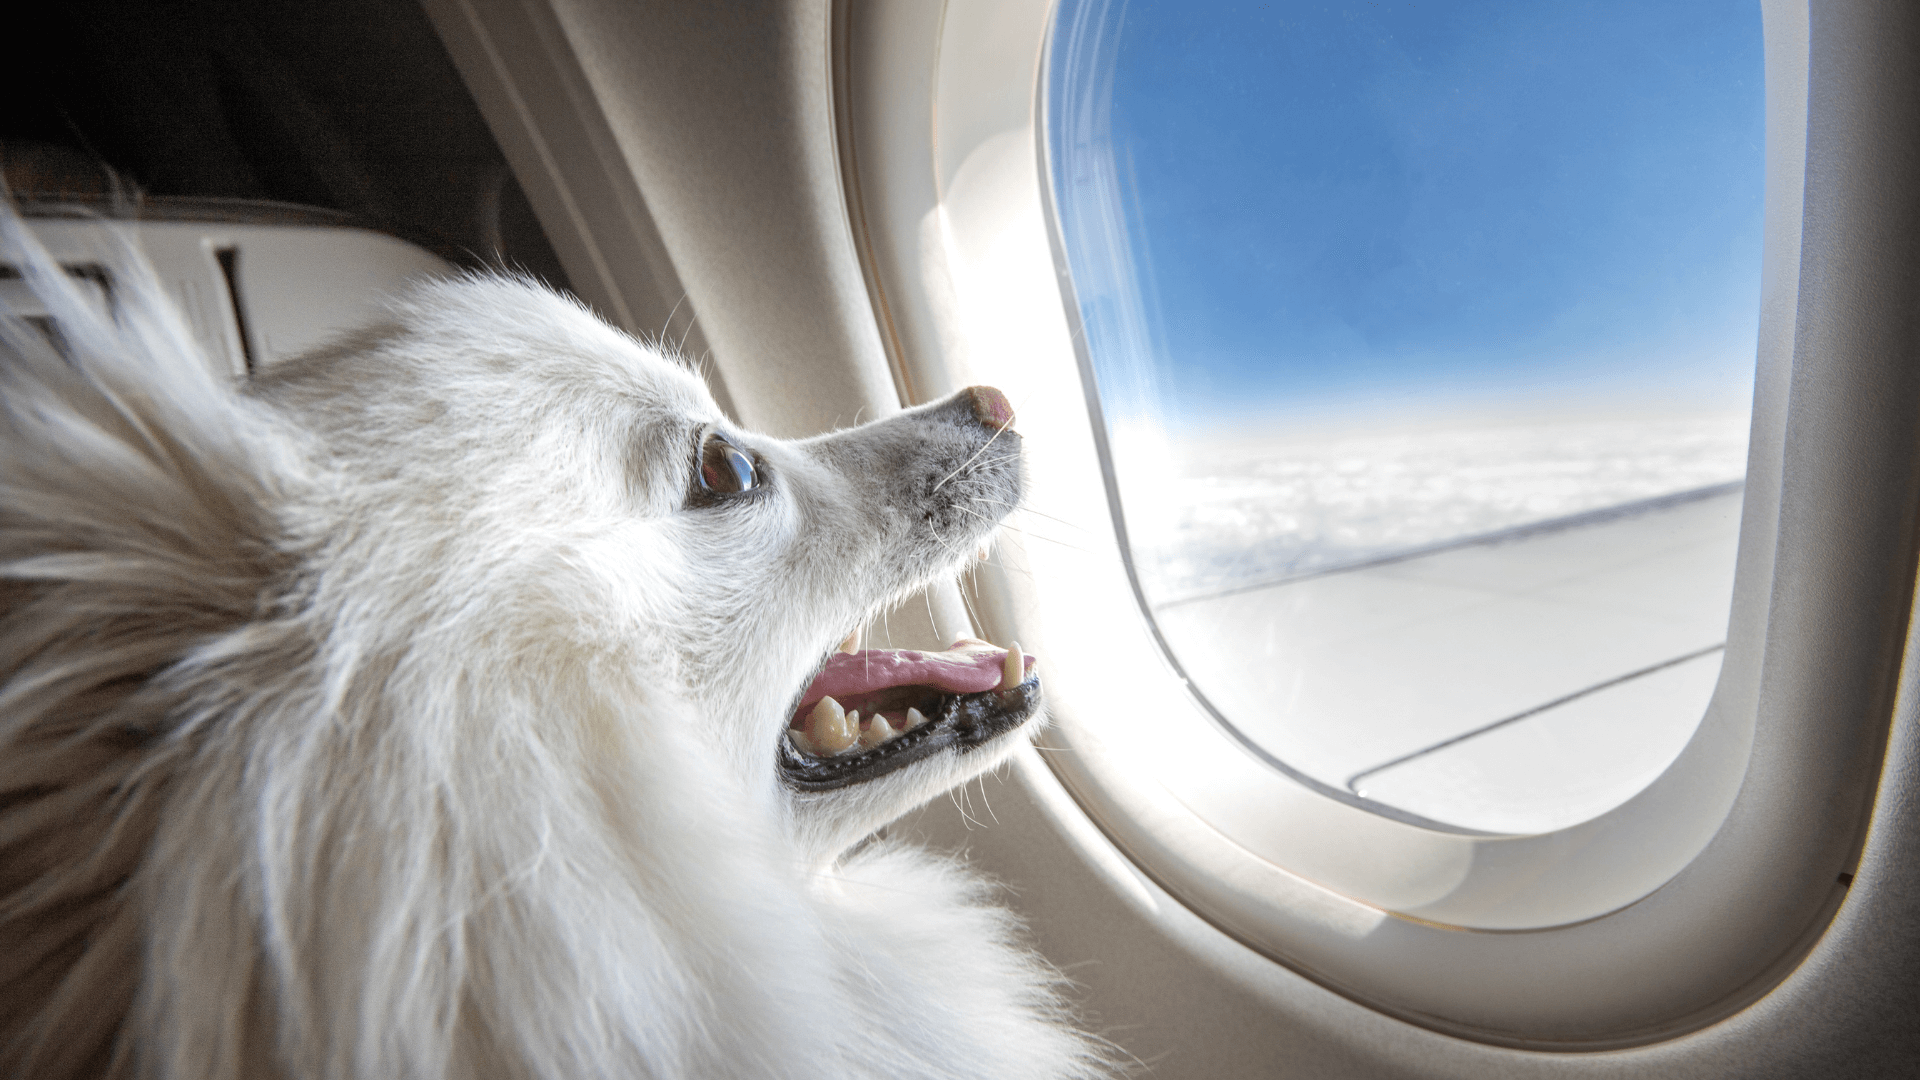 singapore airlines pet travel in cabin